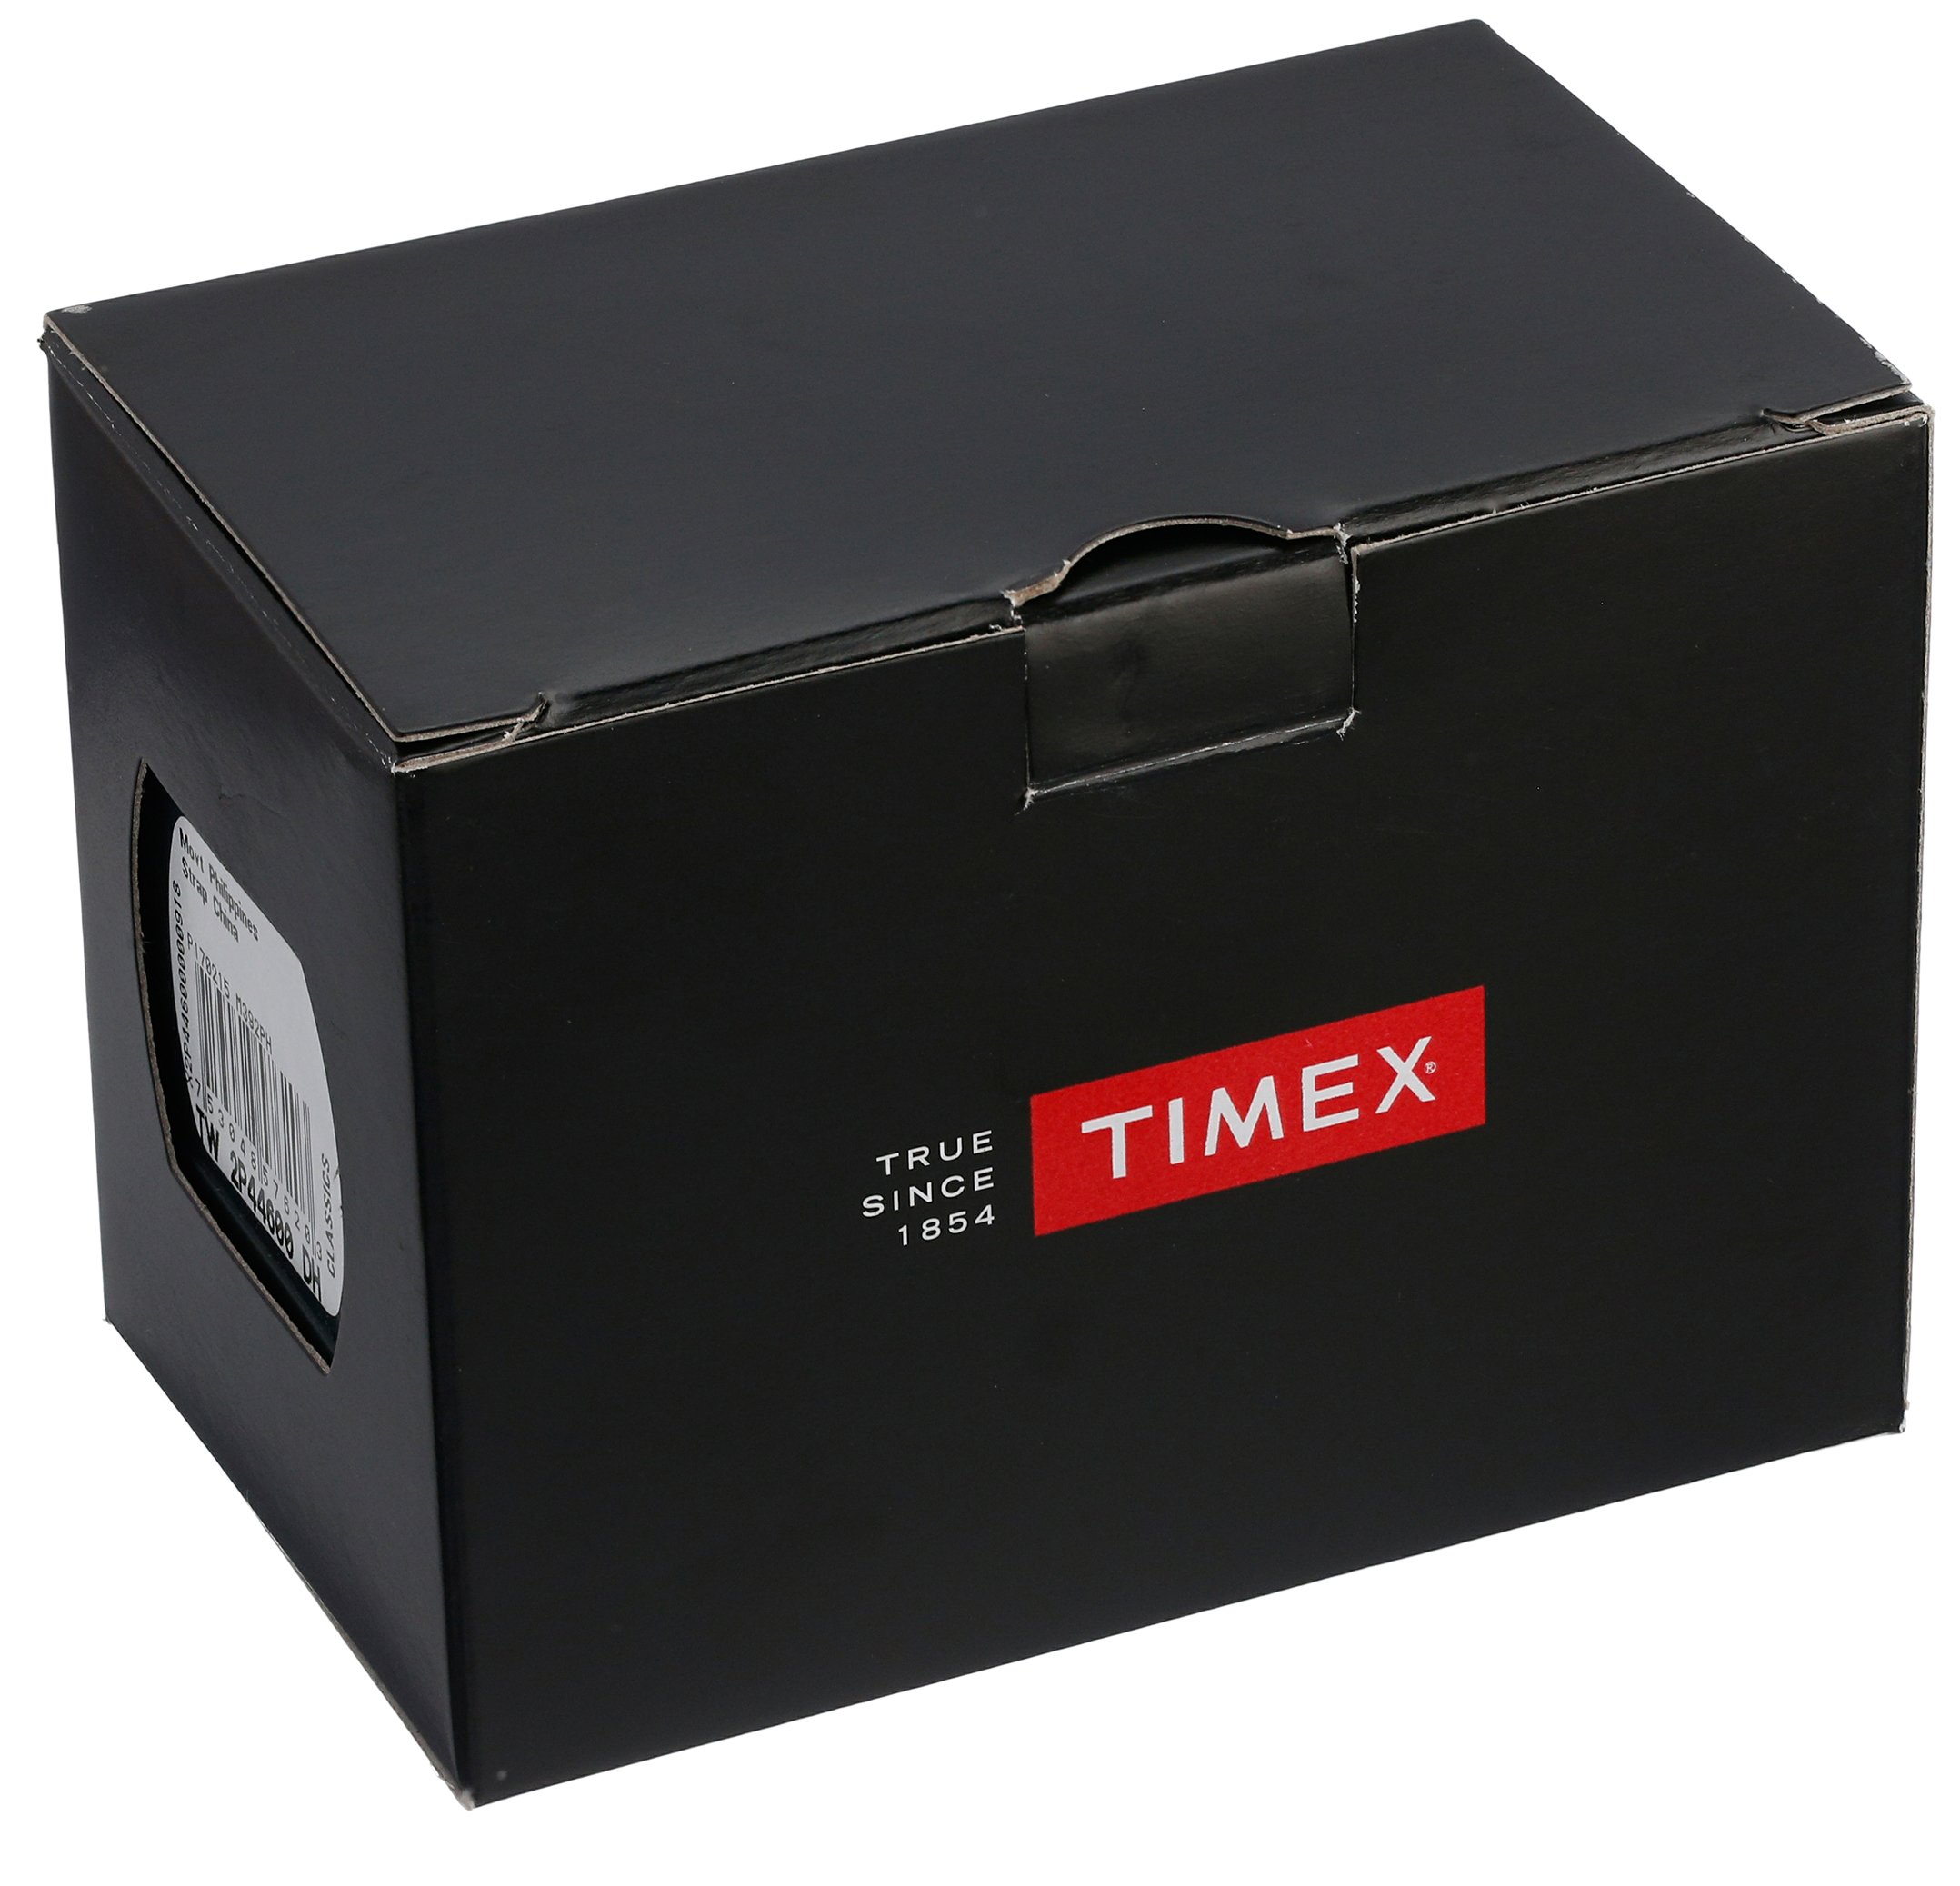 Timex Men's TW4B14200 Expedition Scout 40 Black Leather/Nylon Strap Watch